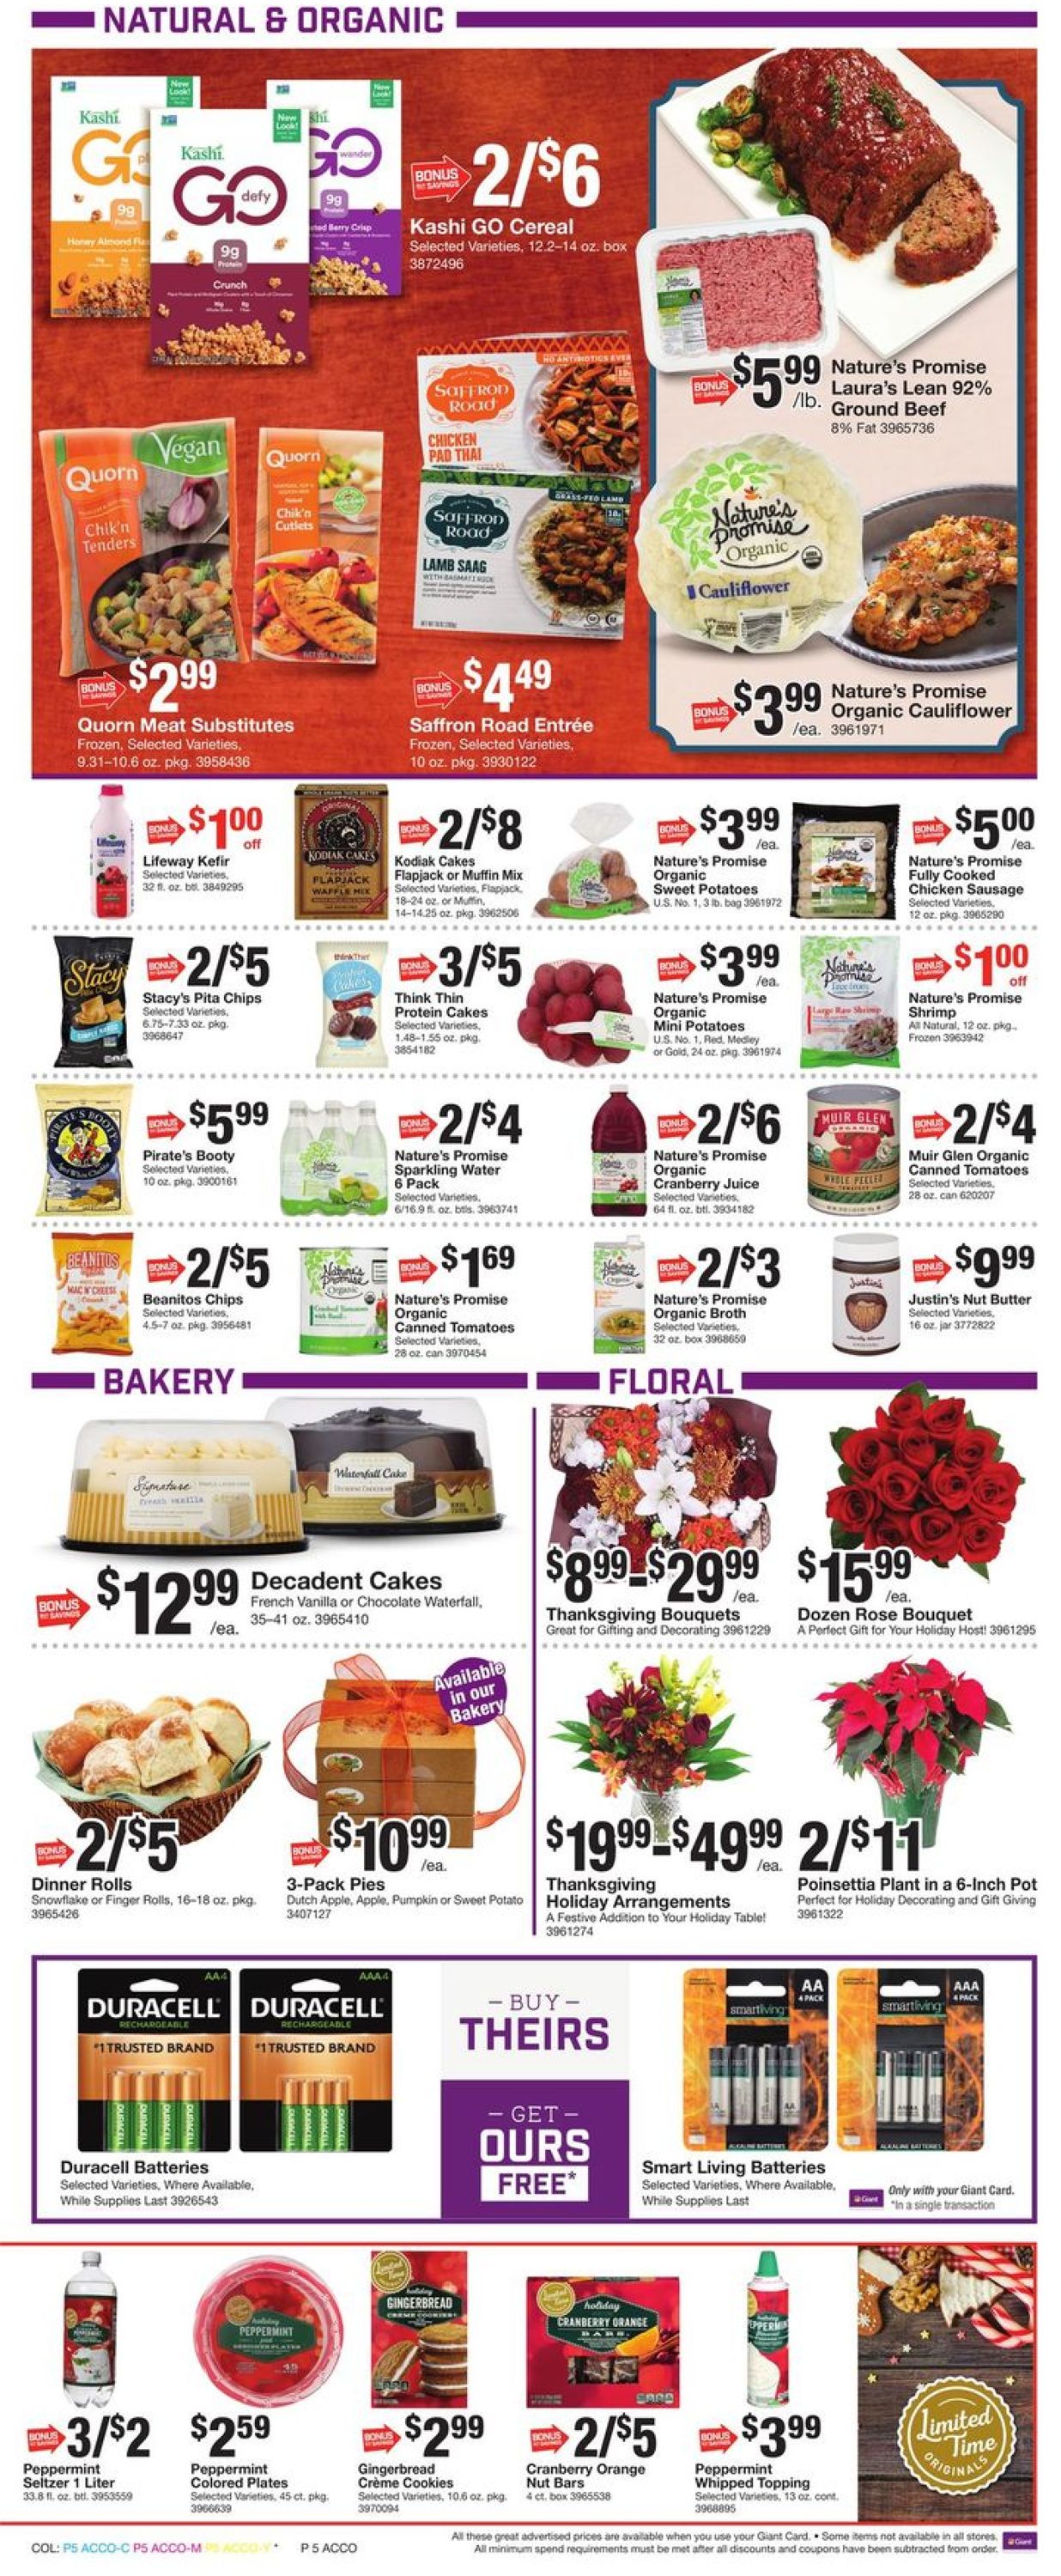 Giant Food - Thanksgiving Ad 2019 Weekly Ad Circular - valid 11/22-11/28/2019 (Page 8)